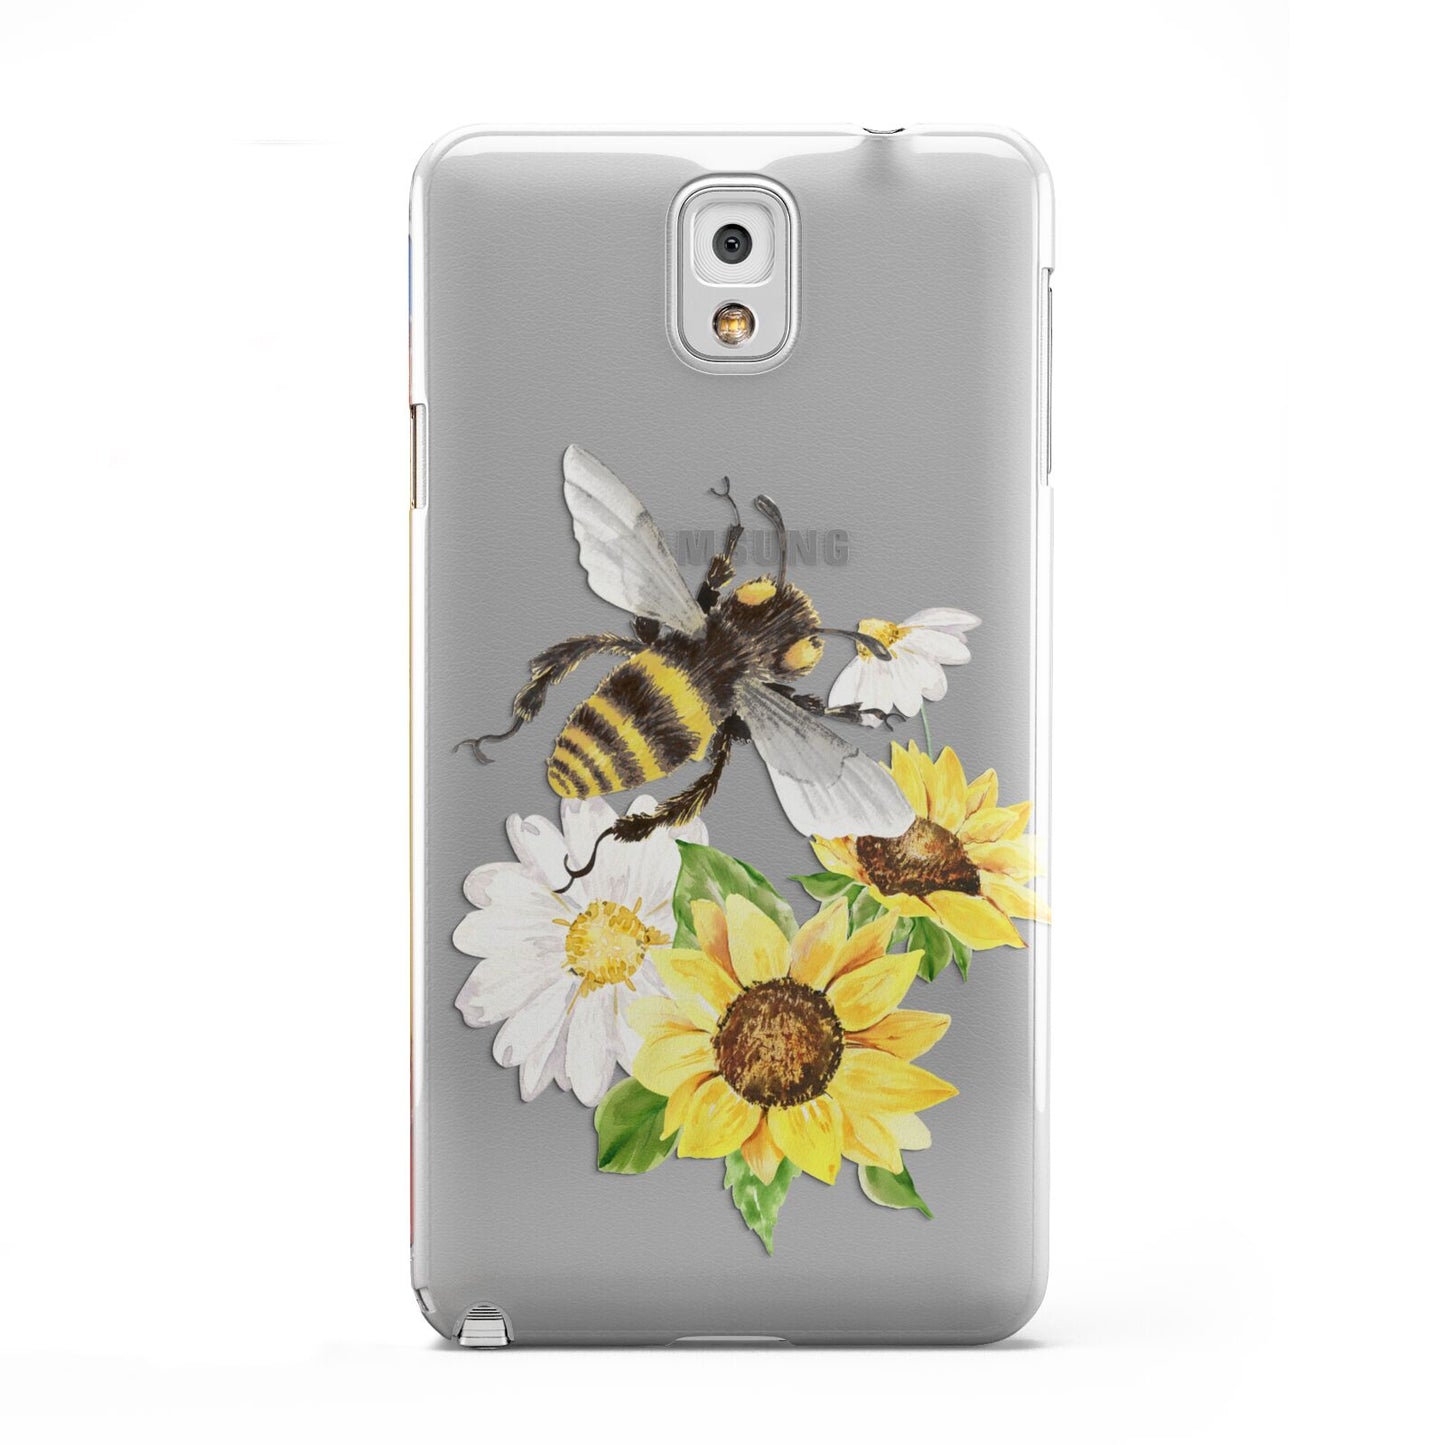 Watercolour Bee and Sunflowers Samsung Galaxy Note 3 Case